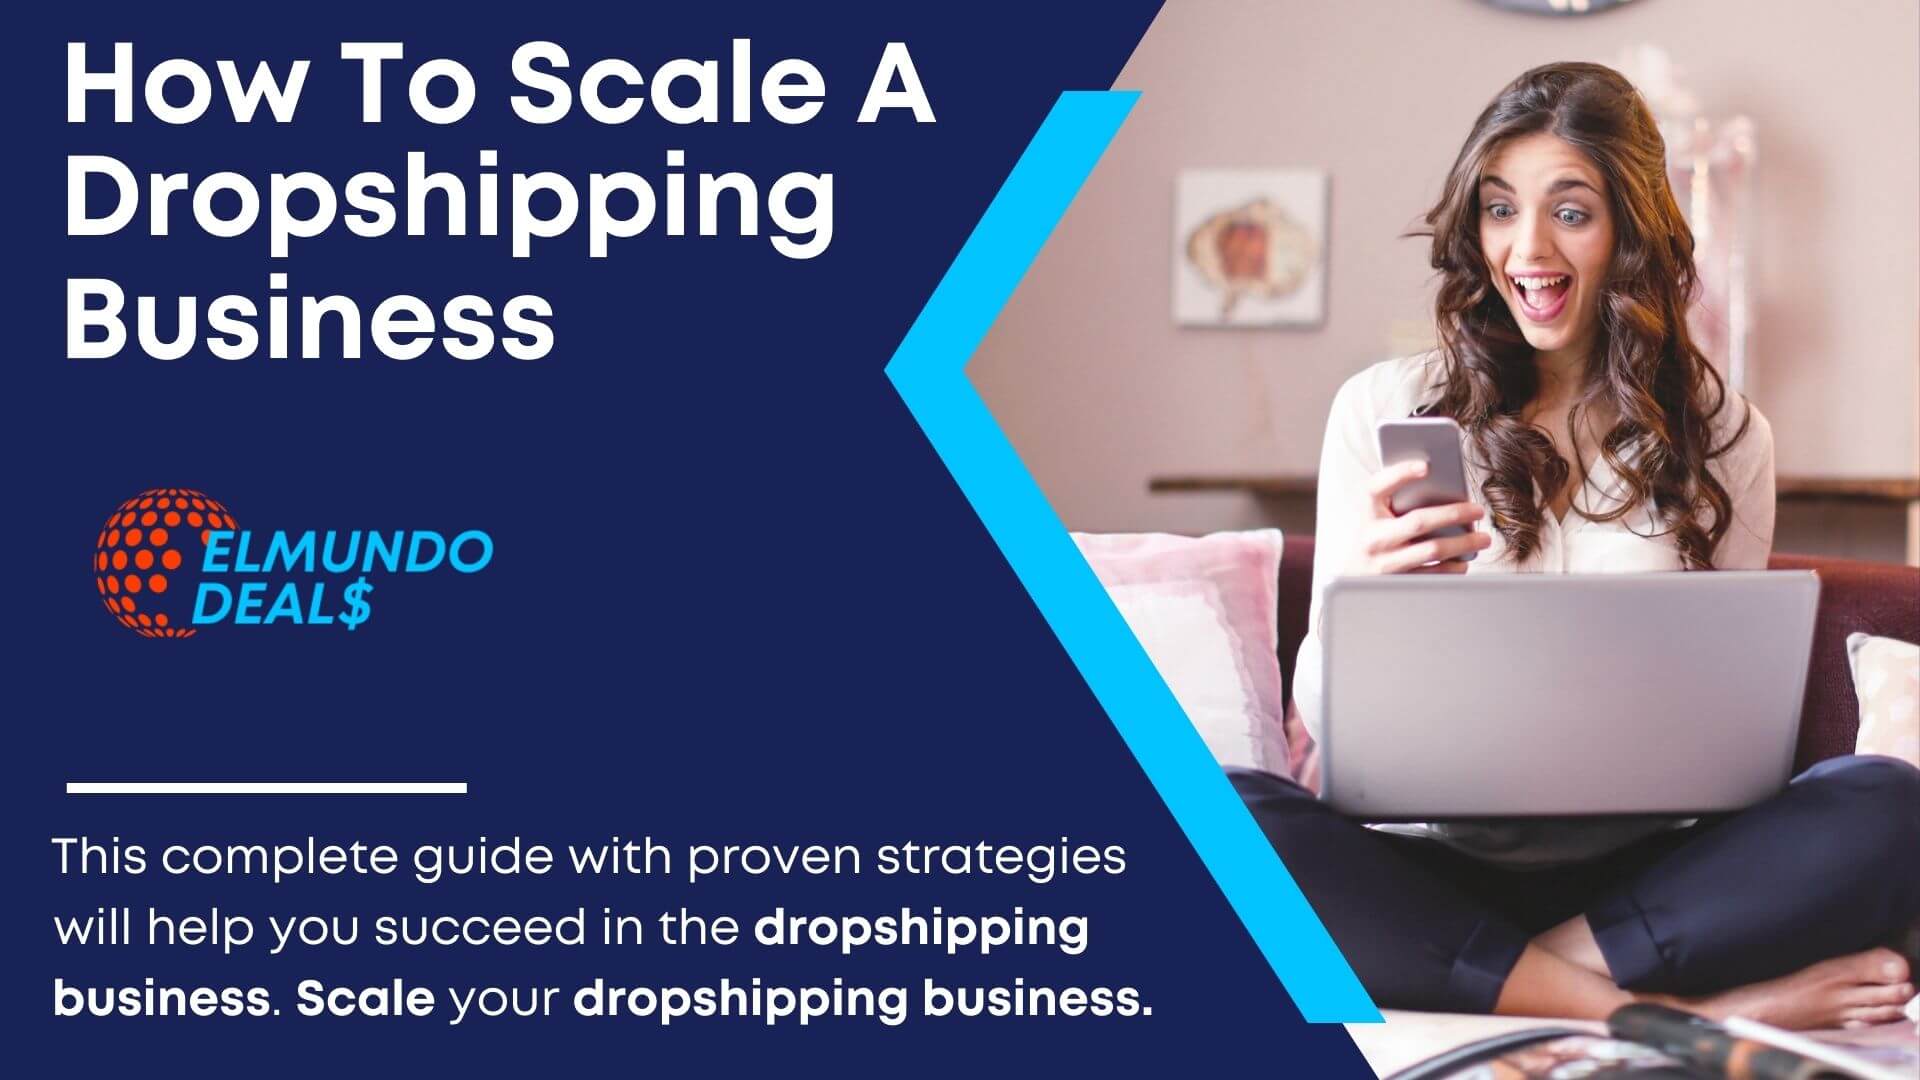 How To Scale A Dropshipping Business In 2023 - Grow & Scale